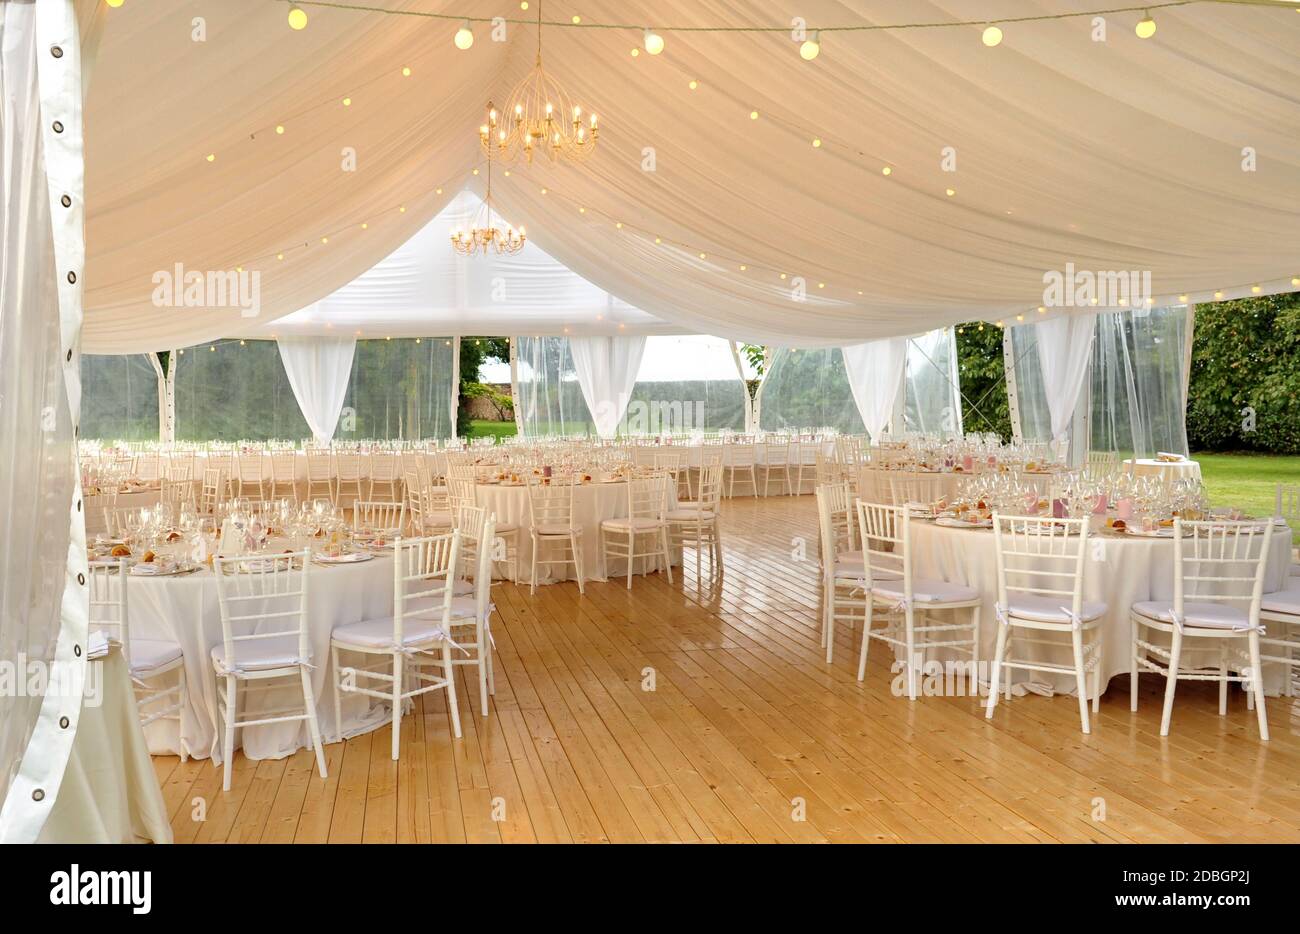 Elegant open air white marquis for a wedding venue with hardwood floor and white formal furniture decor with flowers erected in a lush green garden or Stock Photo